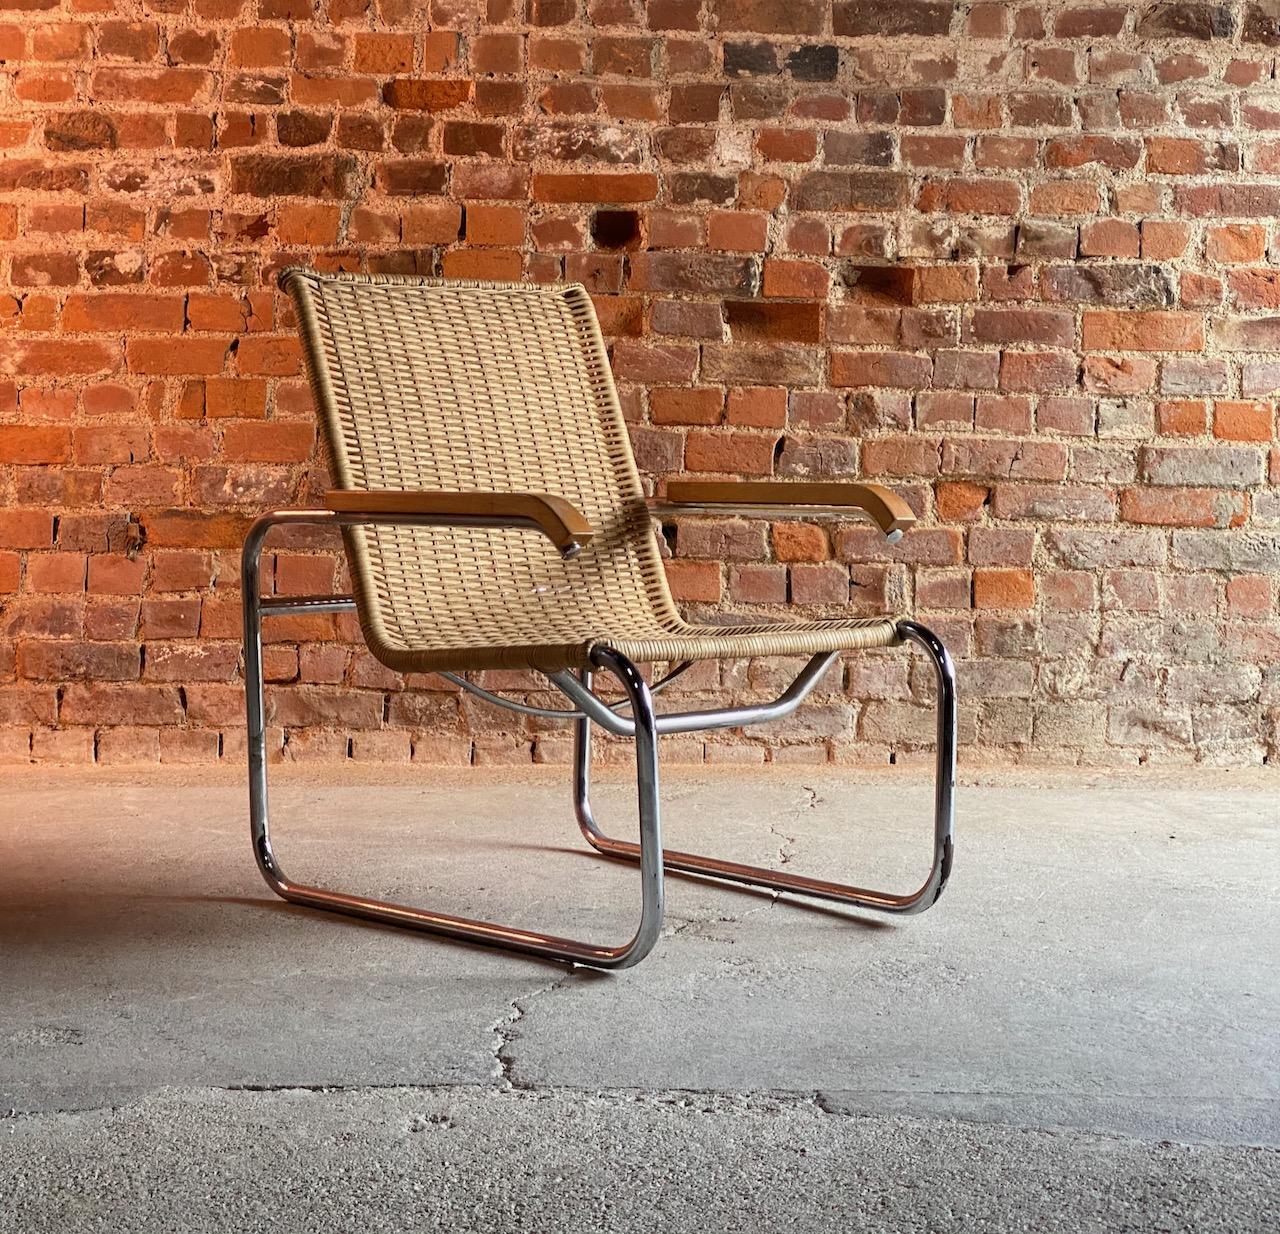 Marcel Breuer B35 lounge chair armchair by Thonet Bauhaus, circa 1940s 

Sublime Bauhaus design Marcel Breuer B35 armchair by Thonet circa 1940s, the cantilever frame with woven rattan seat, wooden armrests with a chromed tubular steel frame, the